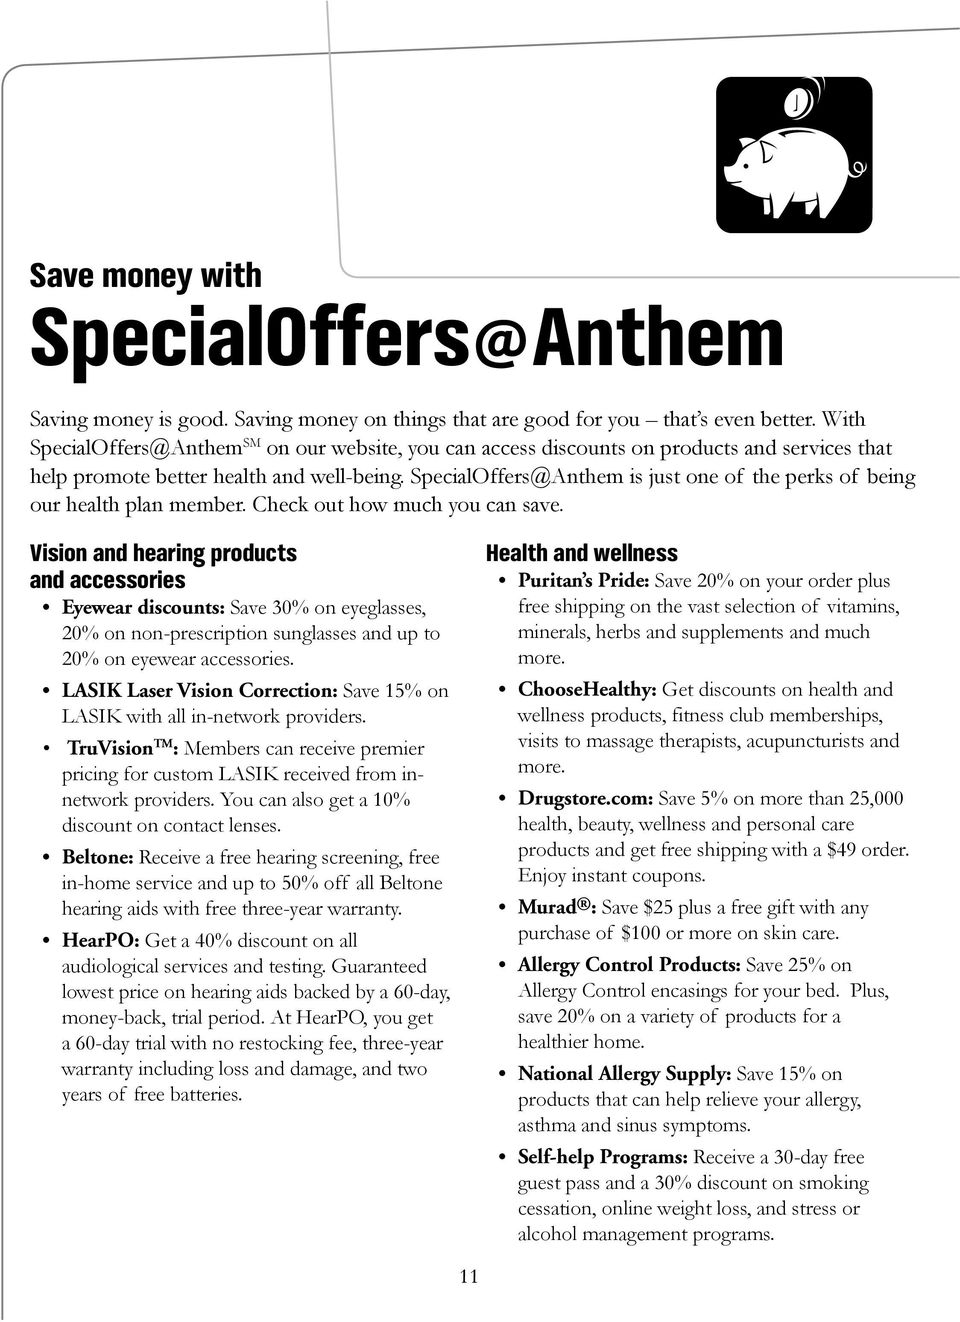 SpecialOffers@Anthem is just one of the perks of being our health plan member. Check out how much you can save.